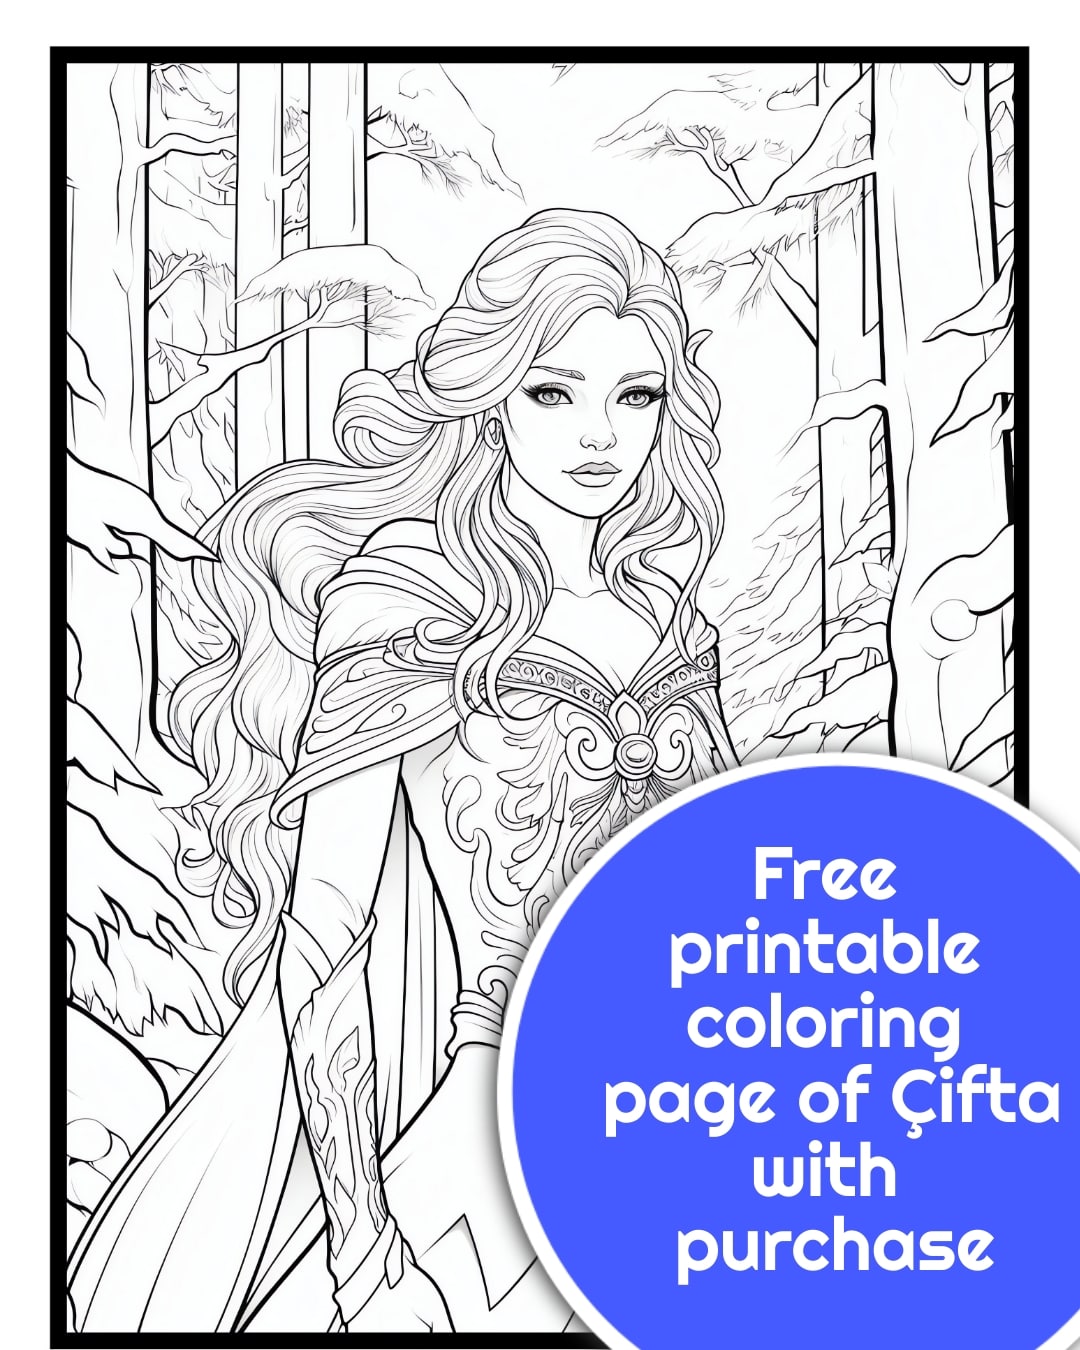 free printable of Cifta with purchase